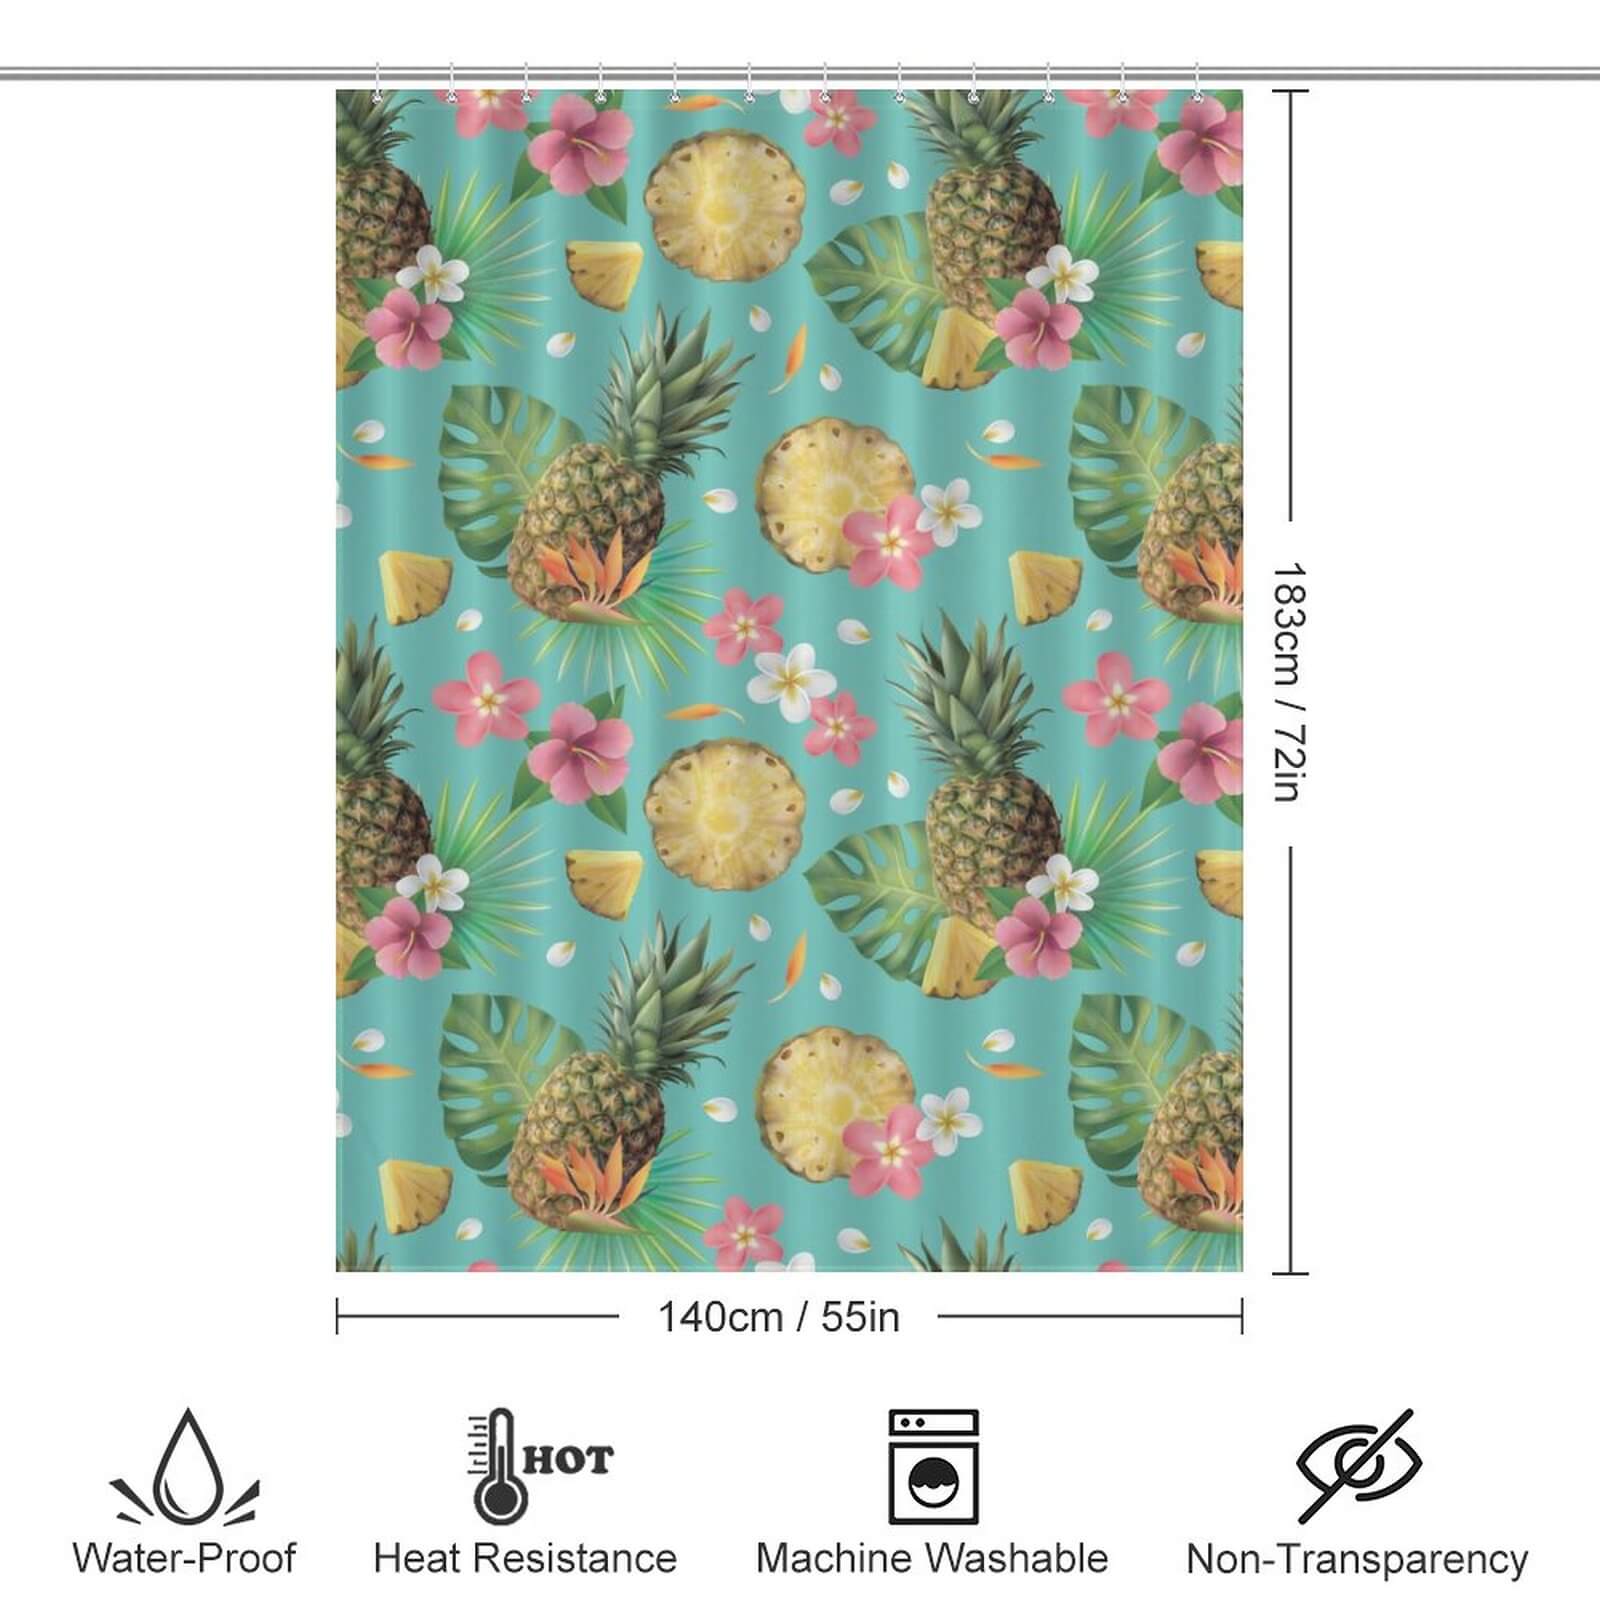 Transform your bathroom into a tropical paradise with this Floral Pineapple Shower Curtain by Cotton Cat.